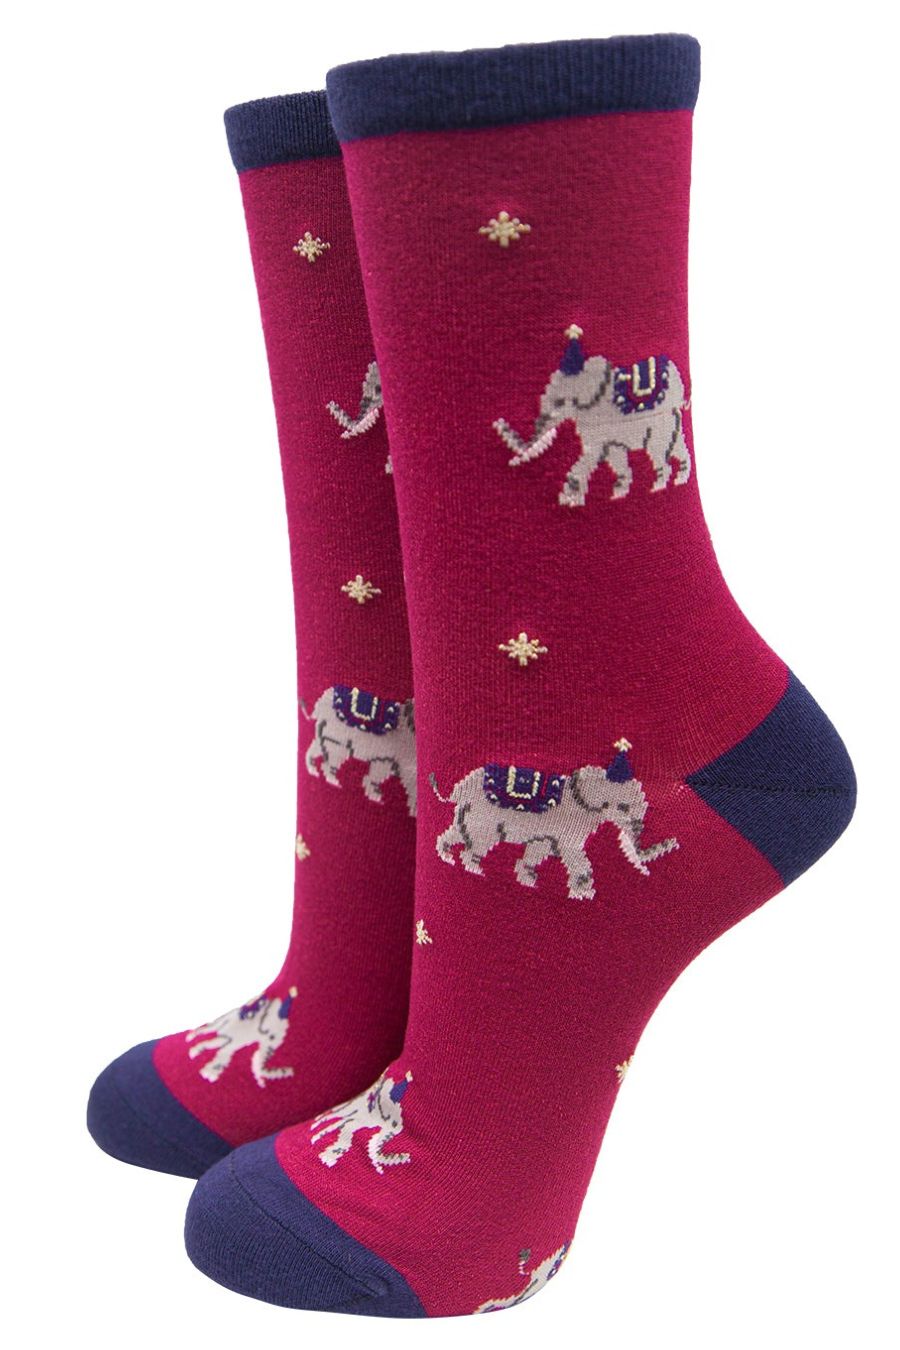 pink bamboo ankle socks with elephants wearing party hats